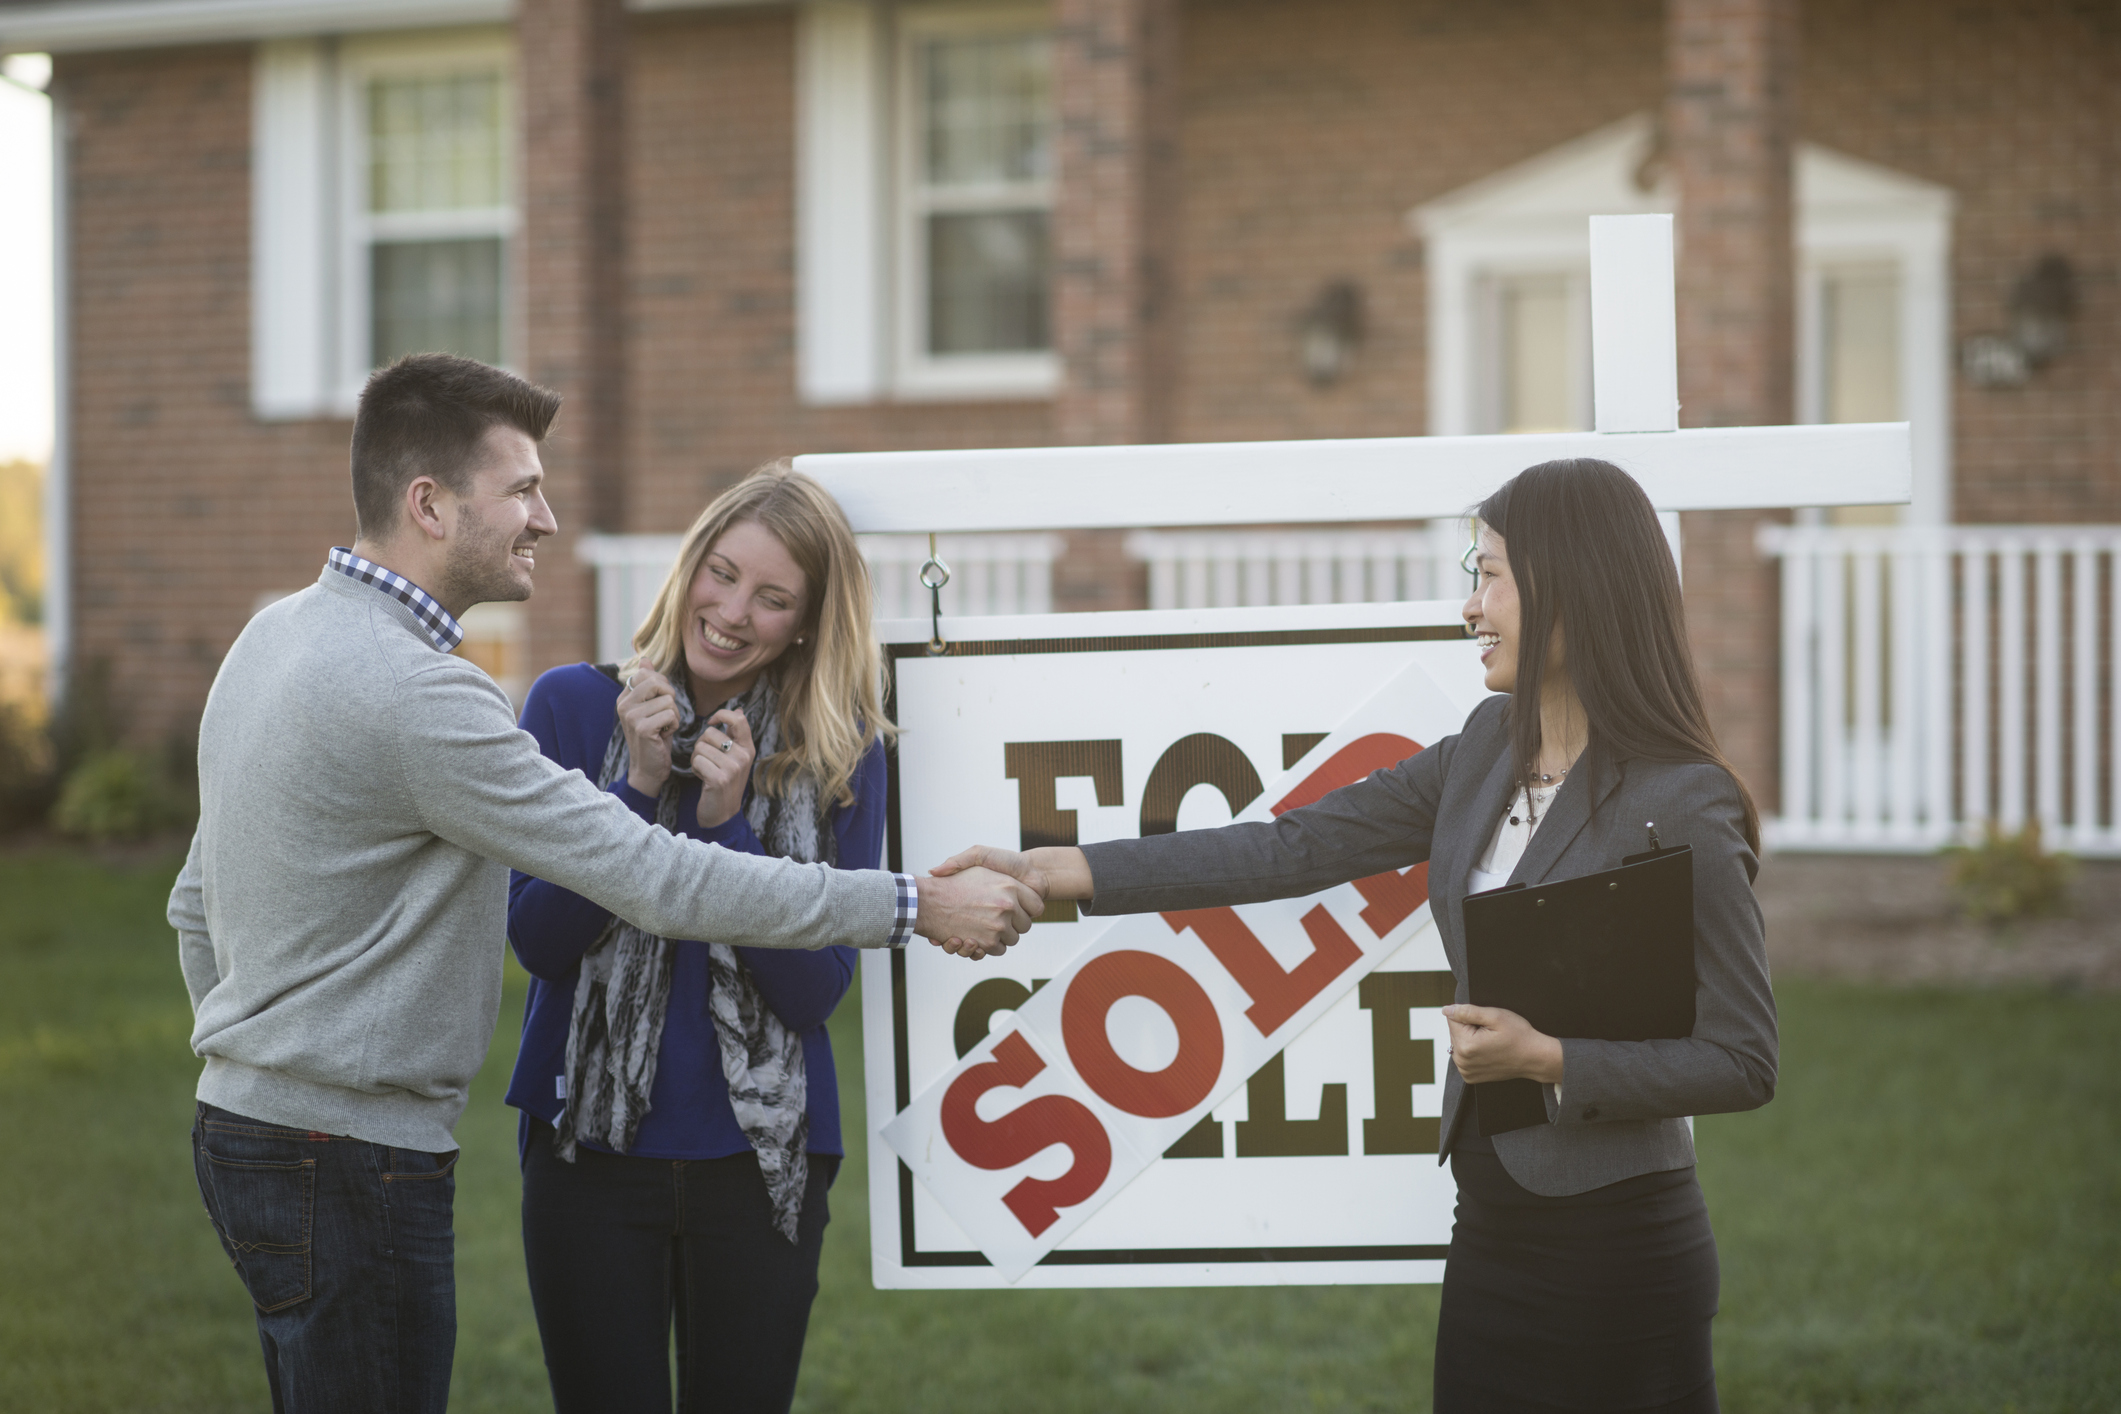  A complete guide on selling your house